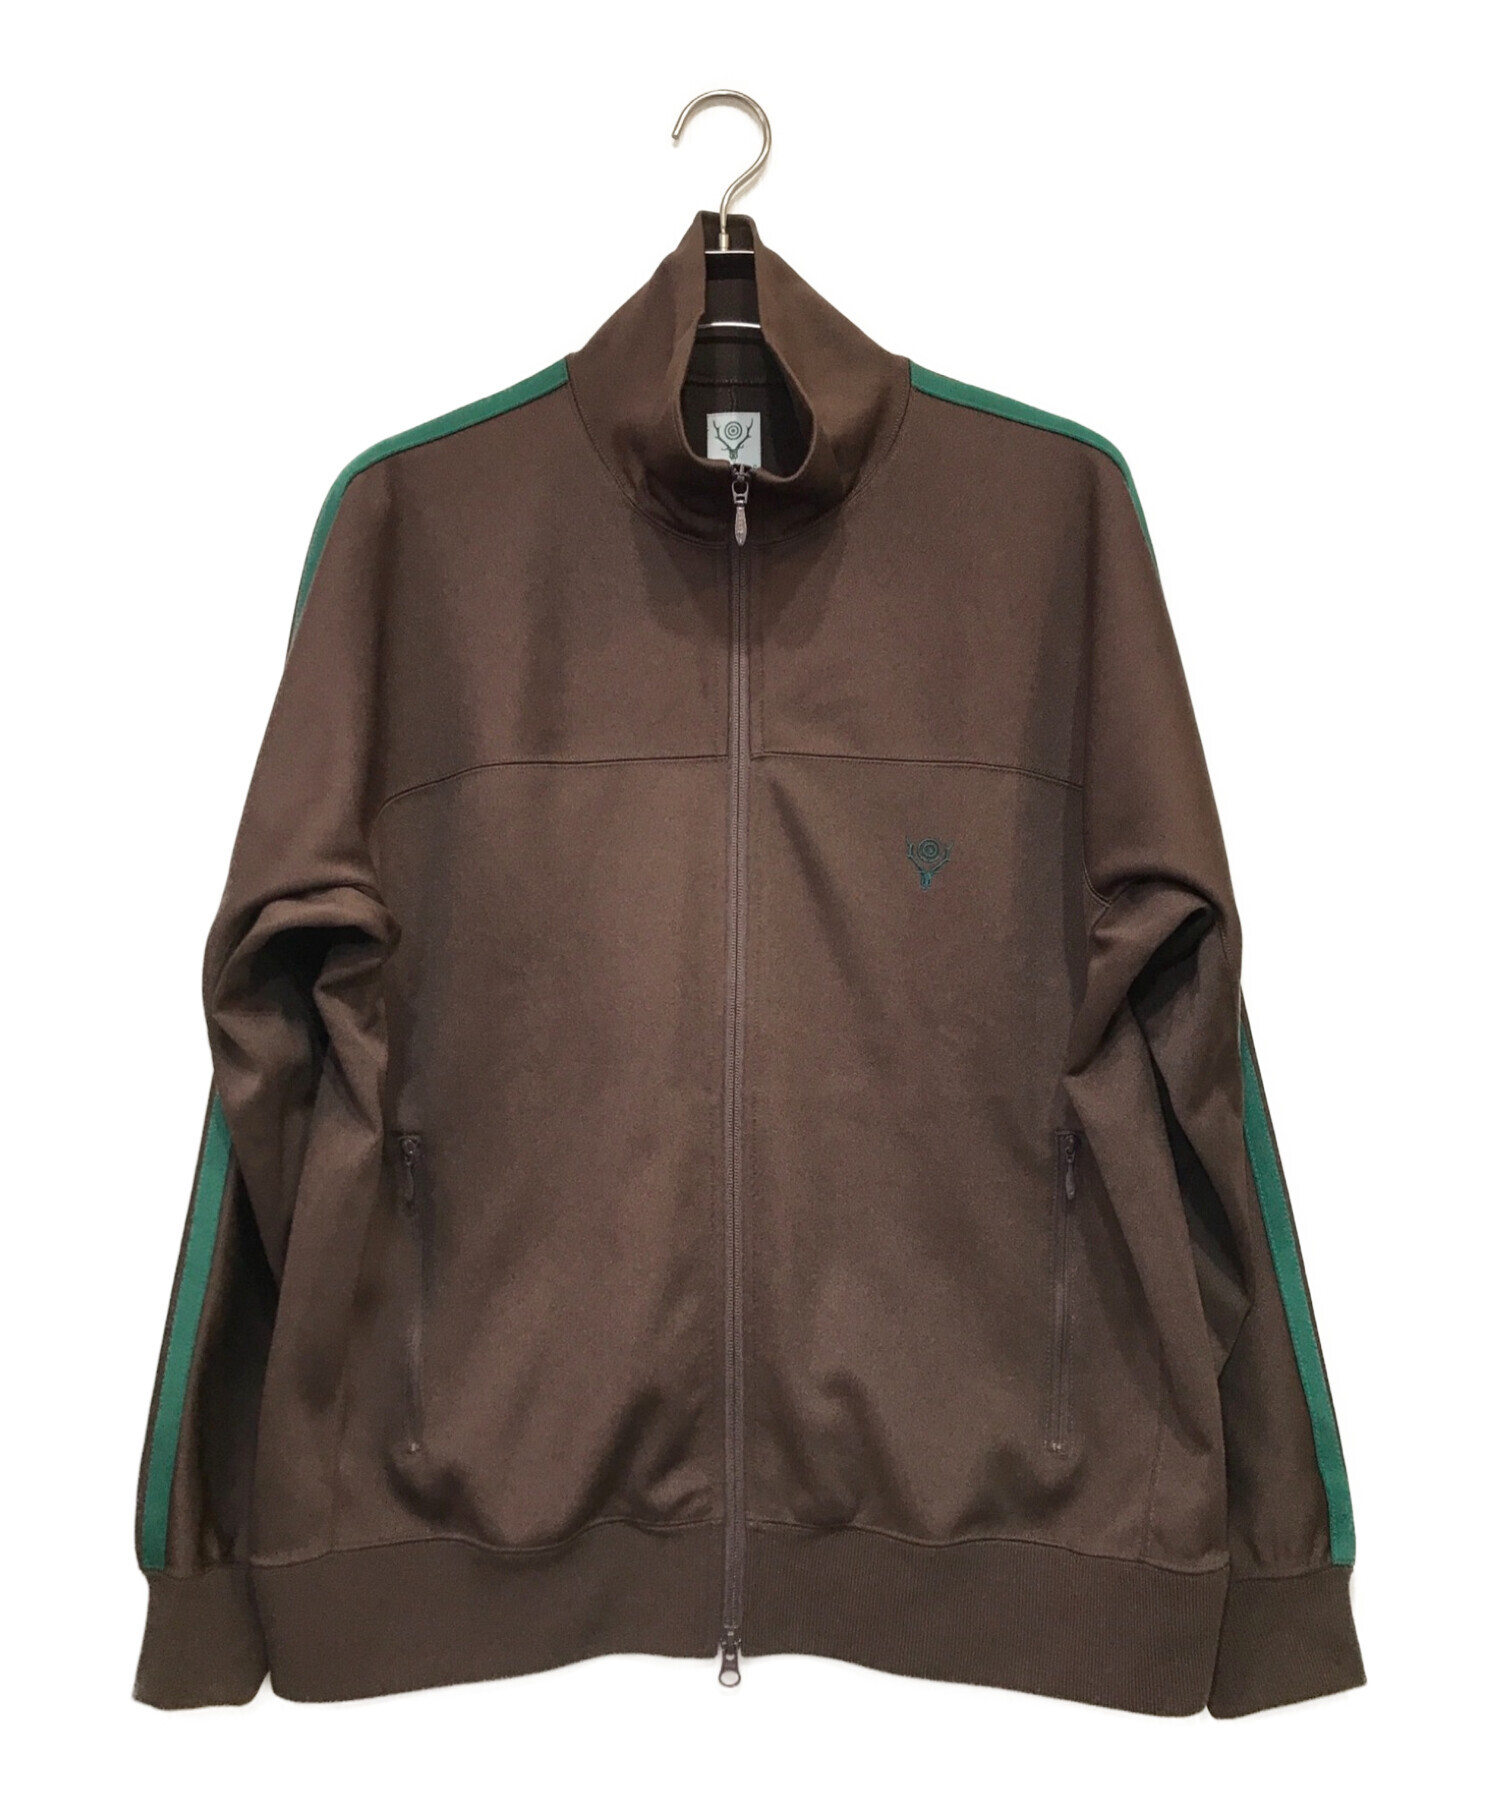 South2 West8 (サウスツーウエストエイト) Trainer Jacket-Poly Smooth トラックジャケット ブラウン サイズ:L